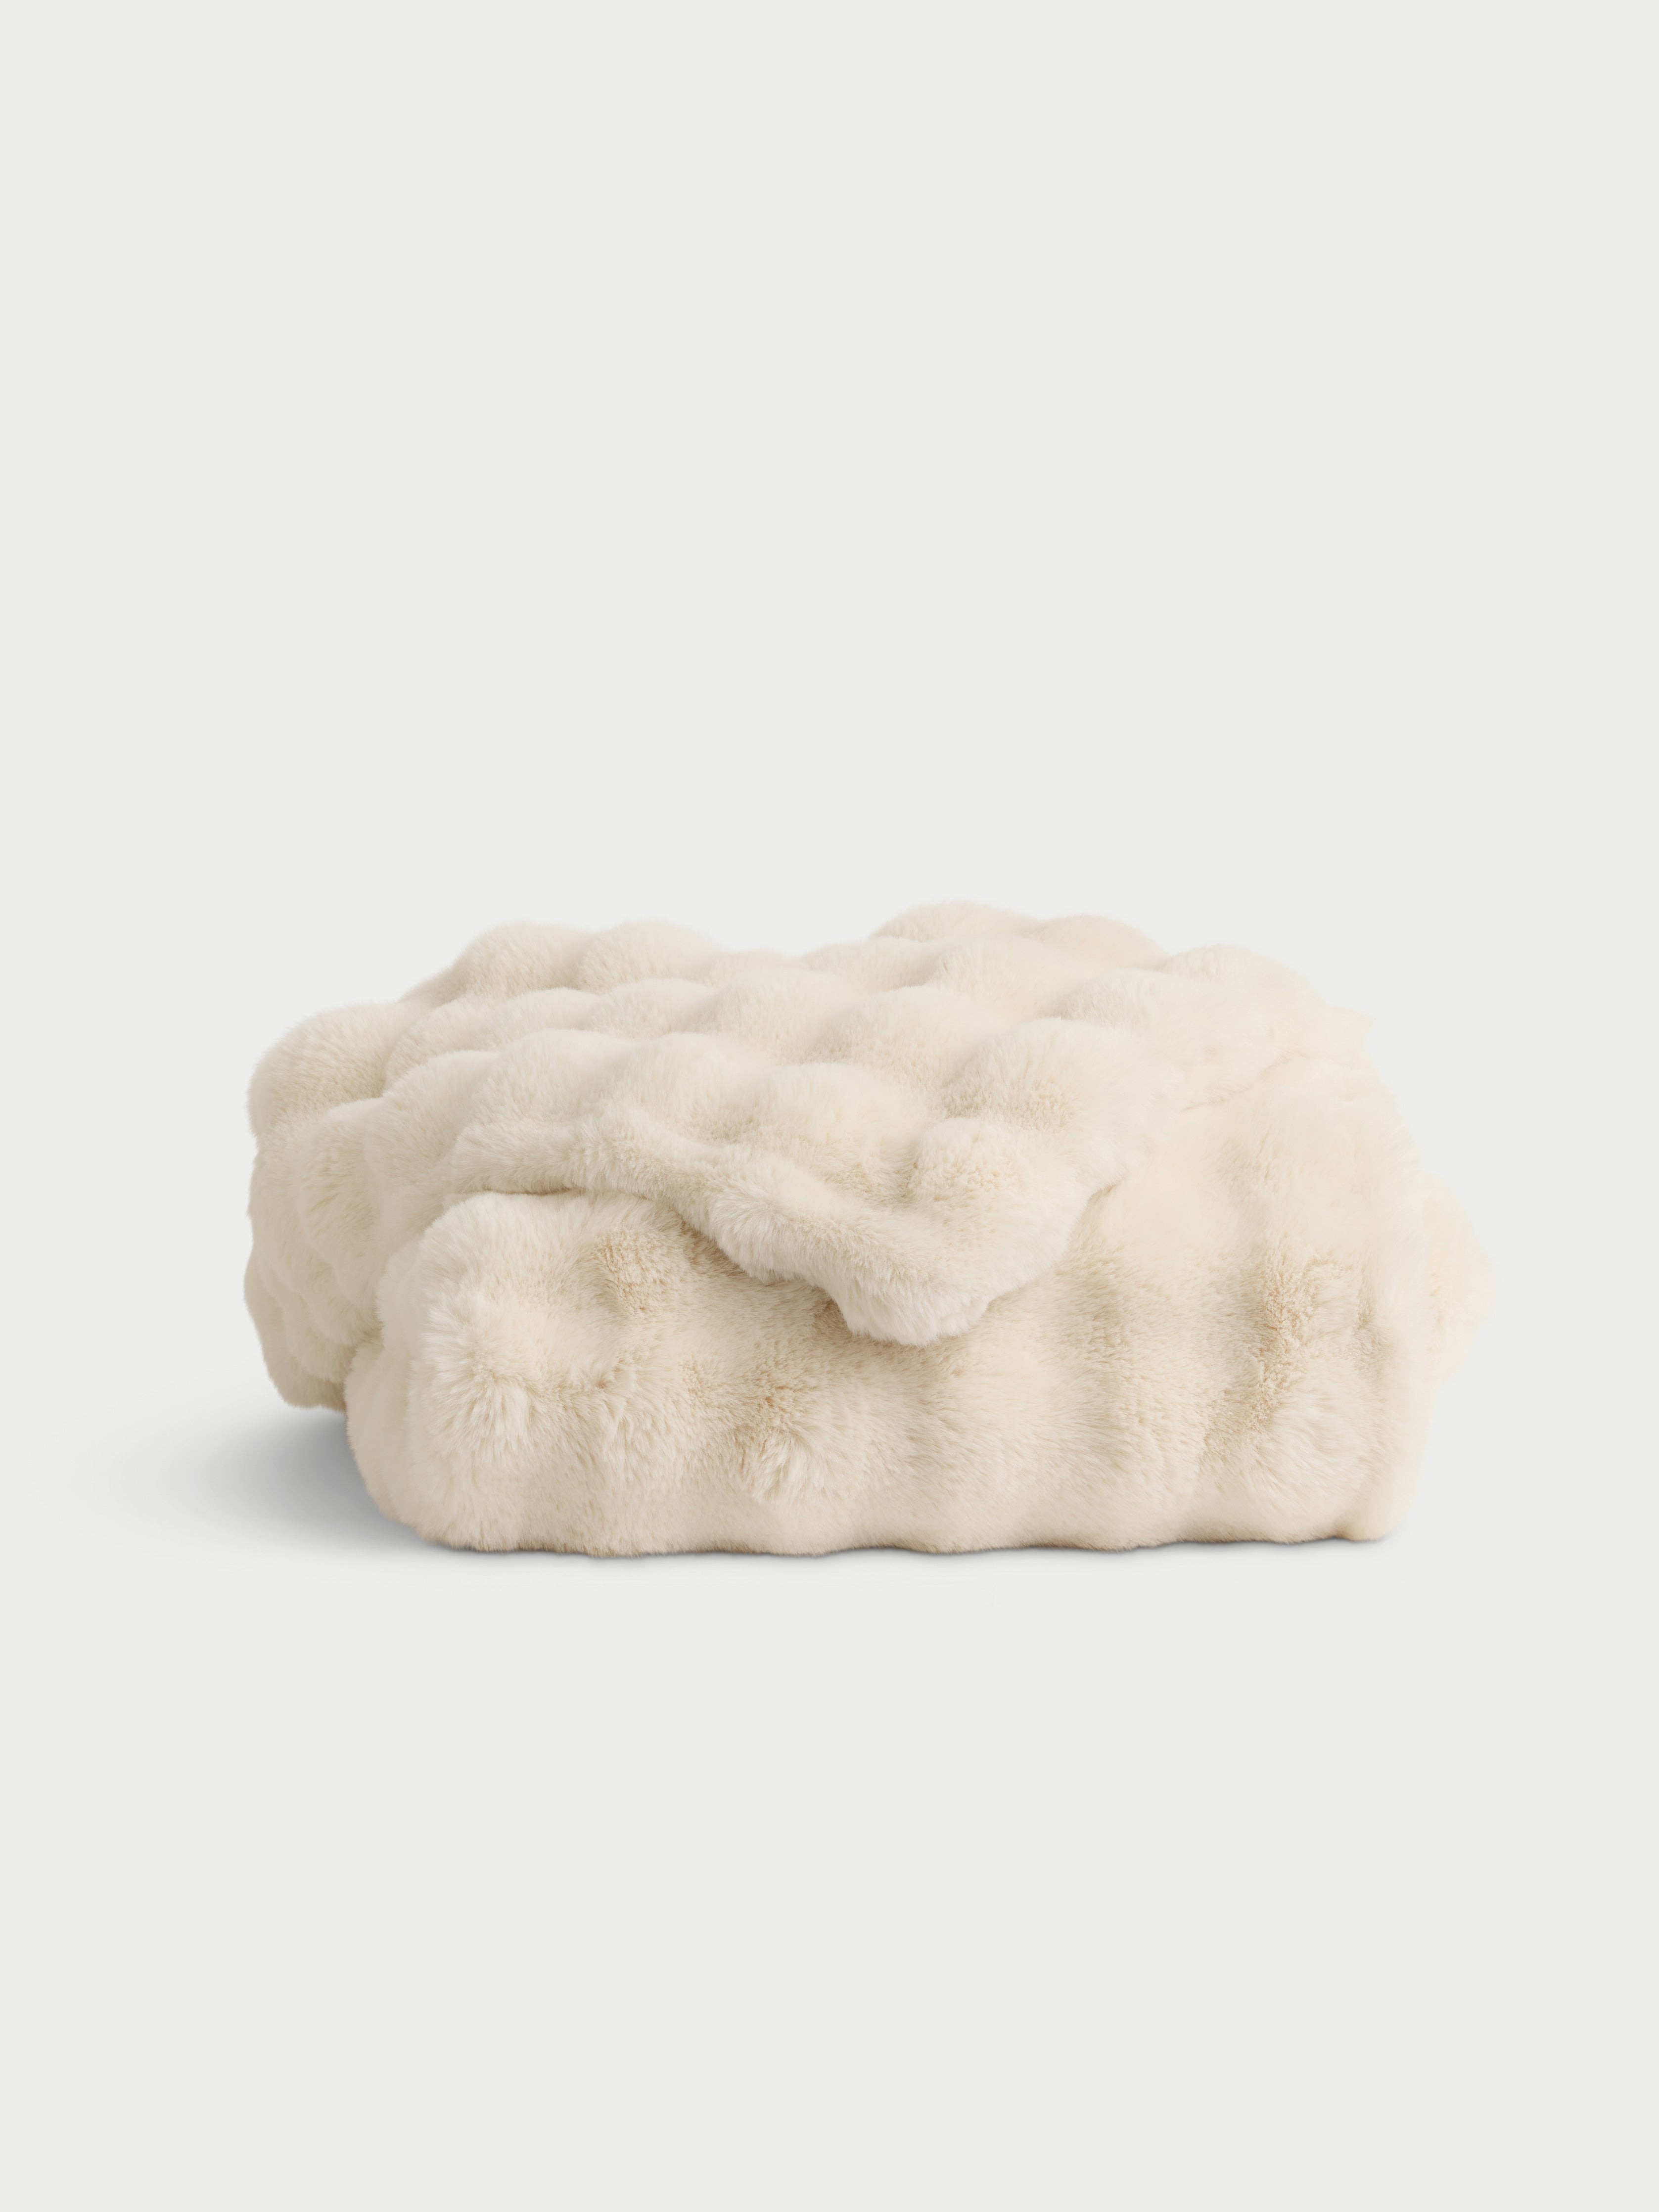 Creme lush faux fur blanket folded with white background |Color:Creme